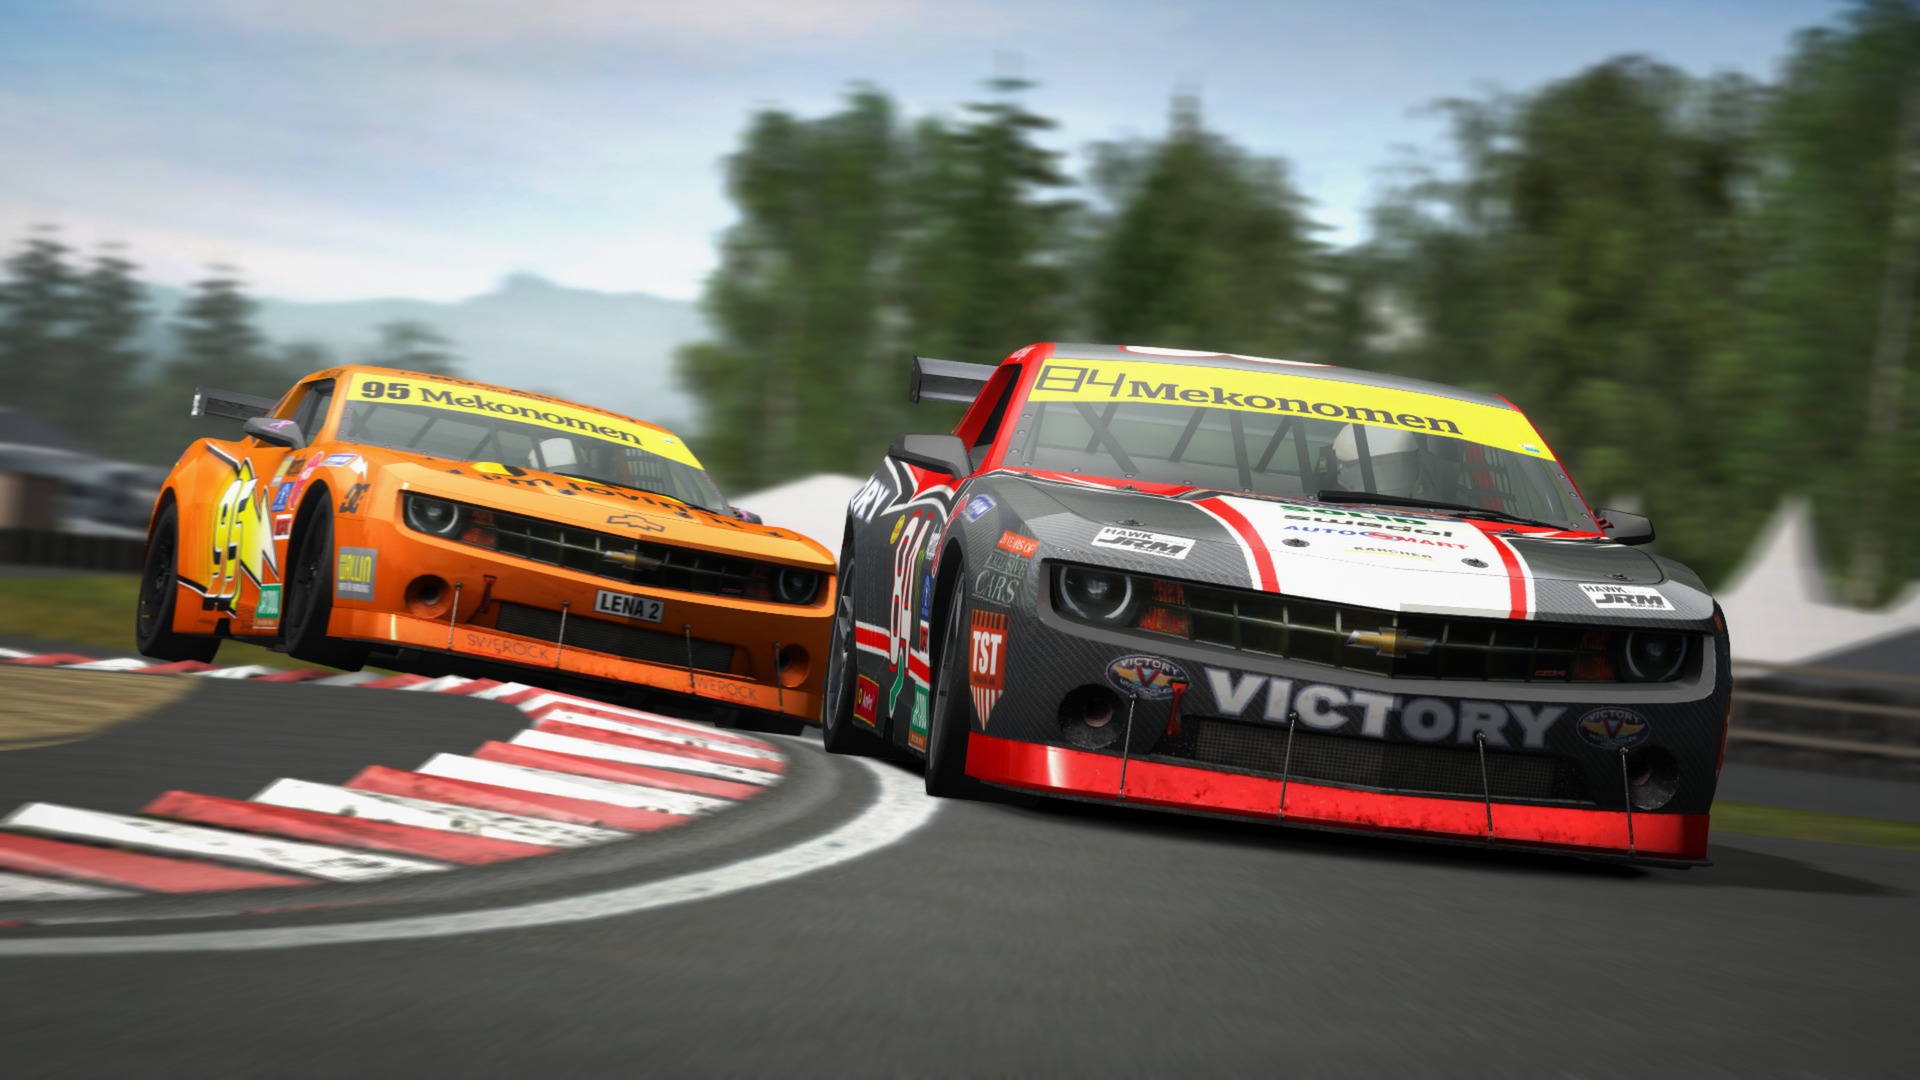 free car racing games download for pc full version